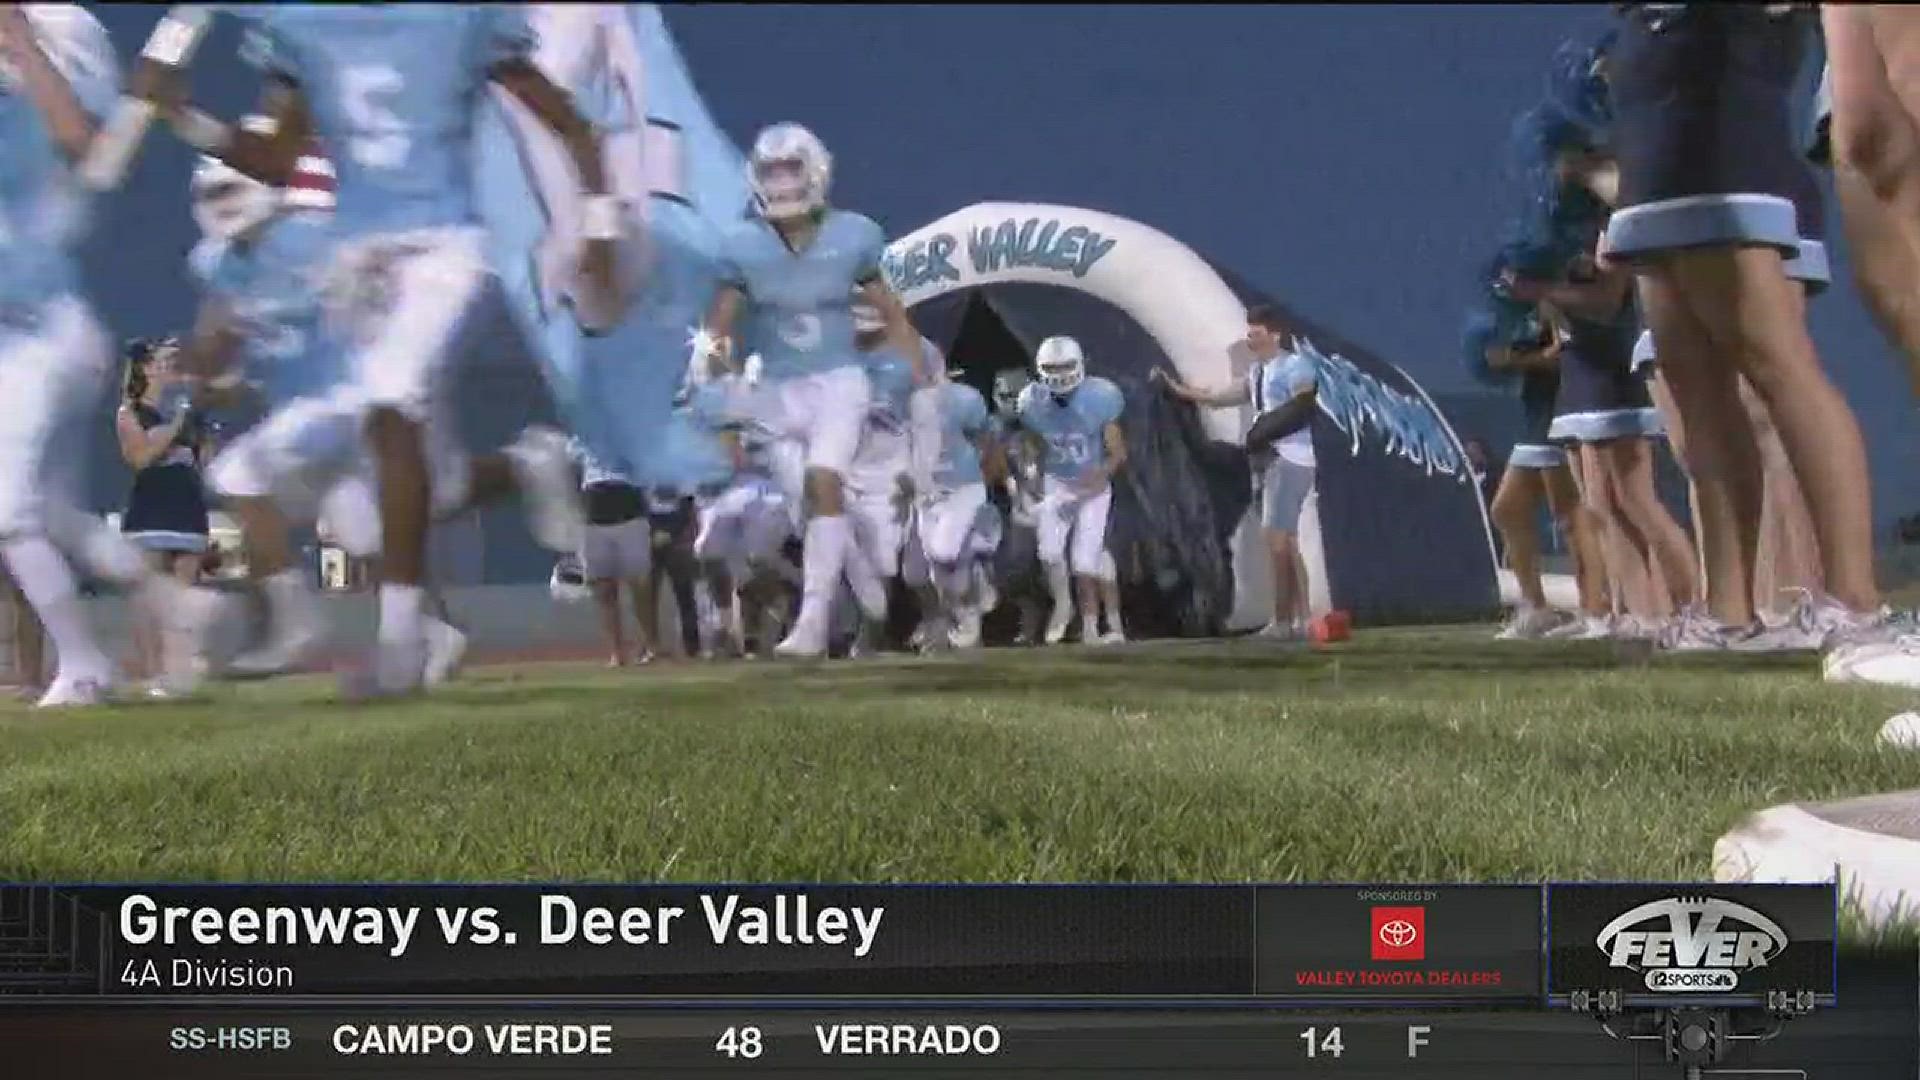 After Deer Valley's starting quarterback went down in the first half, it was all Greenway.